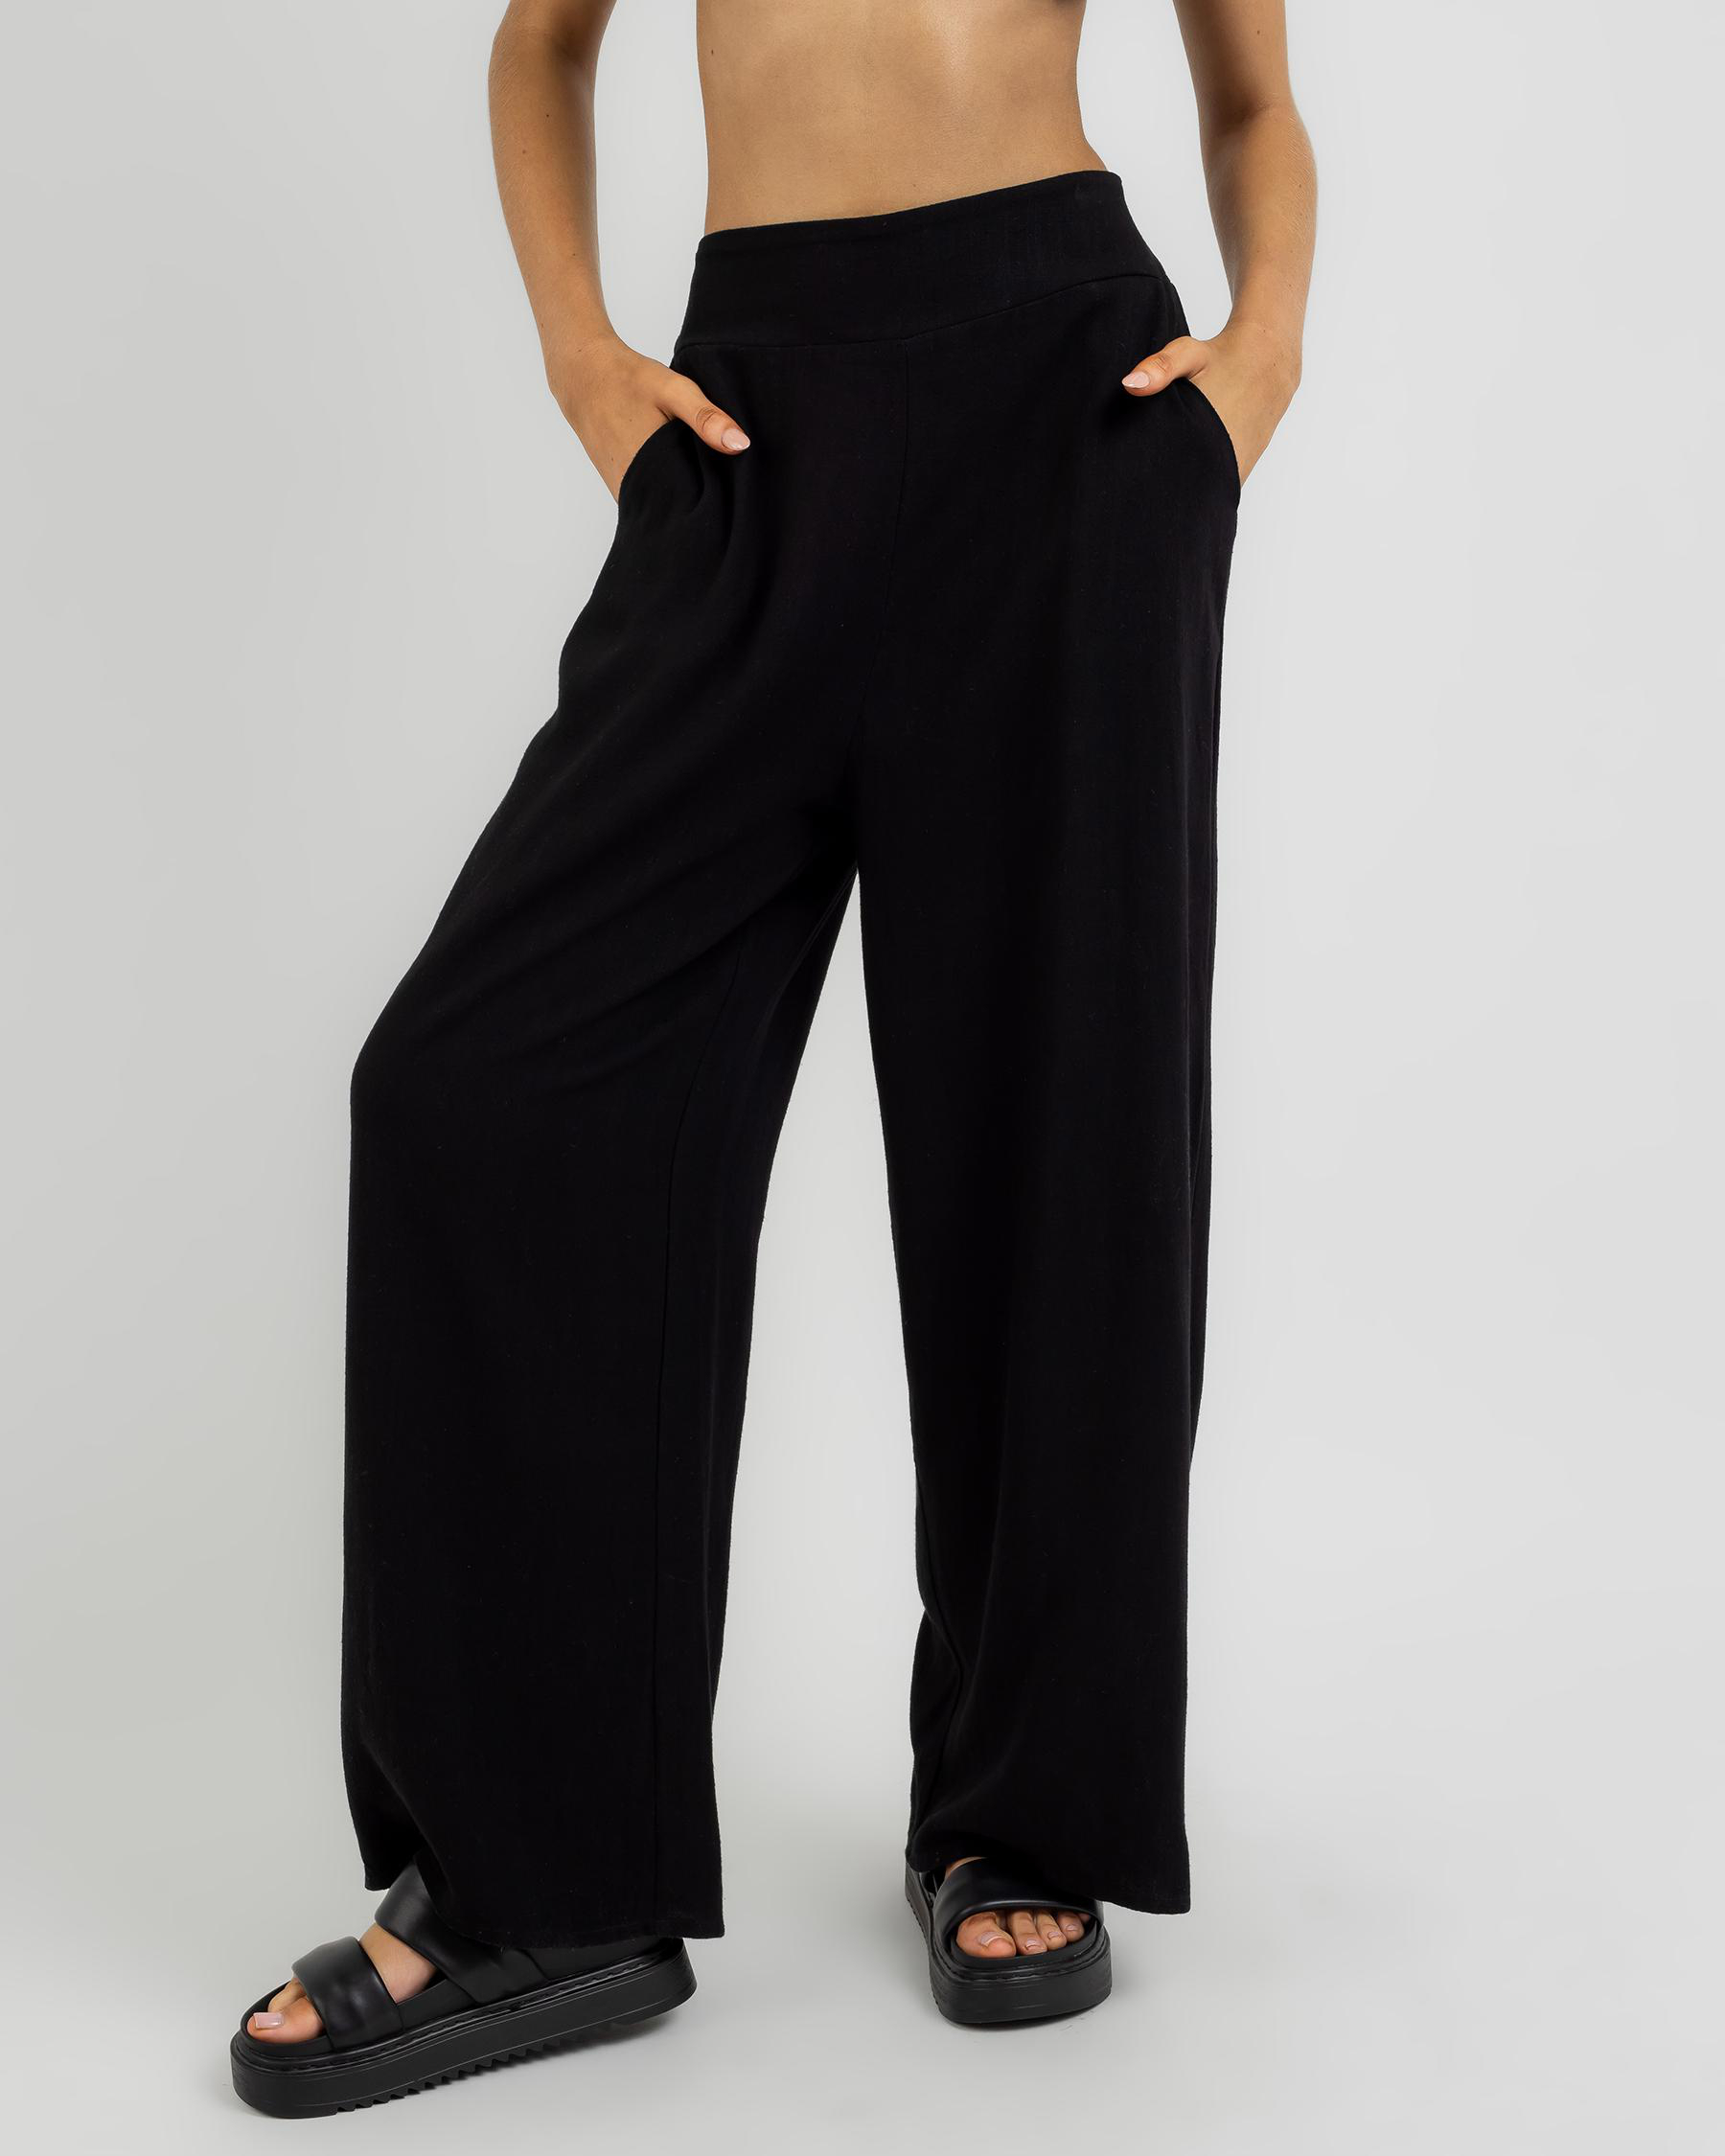 Yours Truly Cali Beach Pants In Black - Fast Shipping & Easy Returns ...